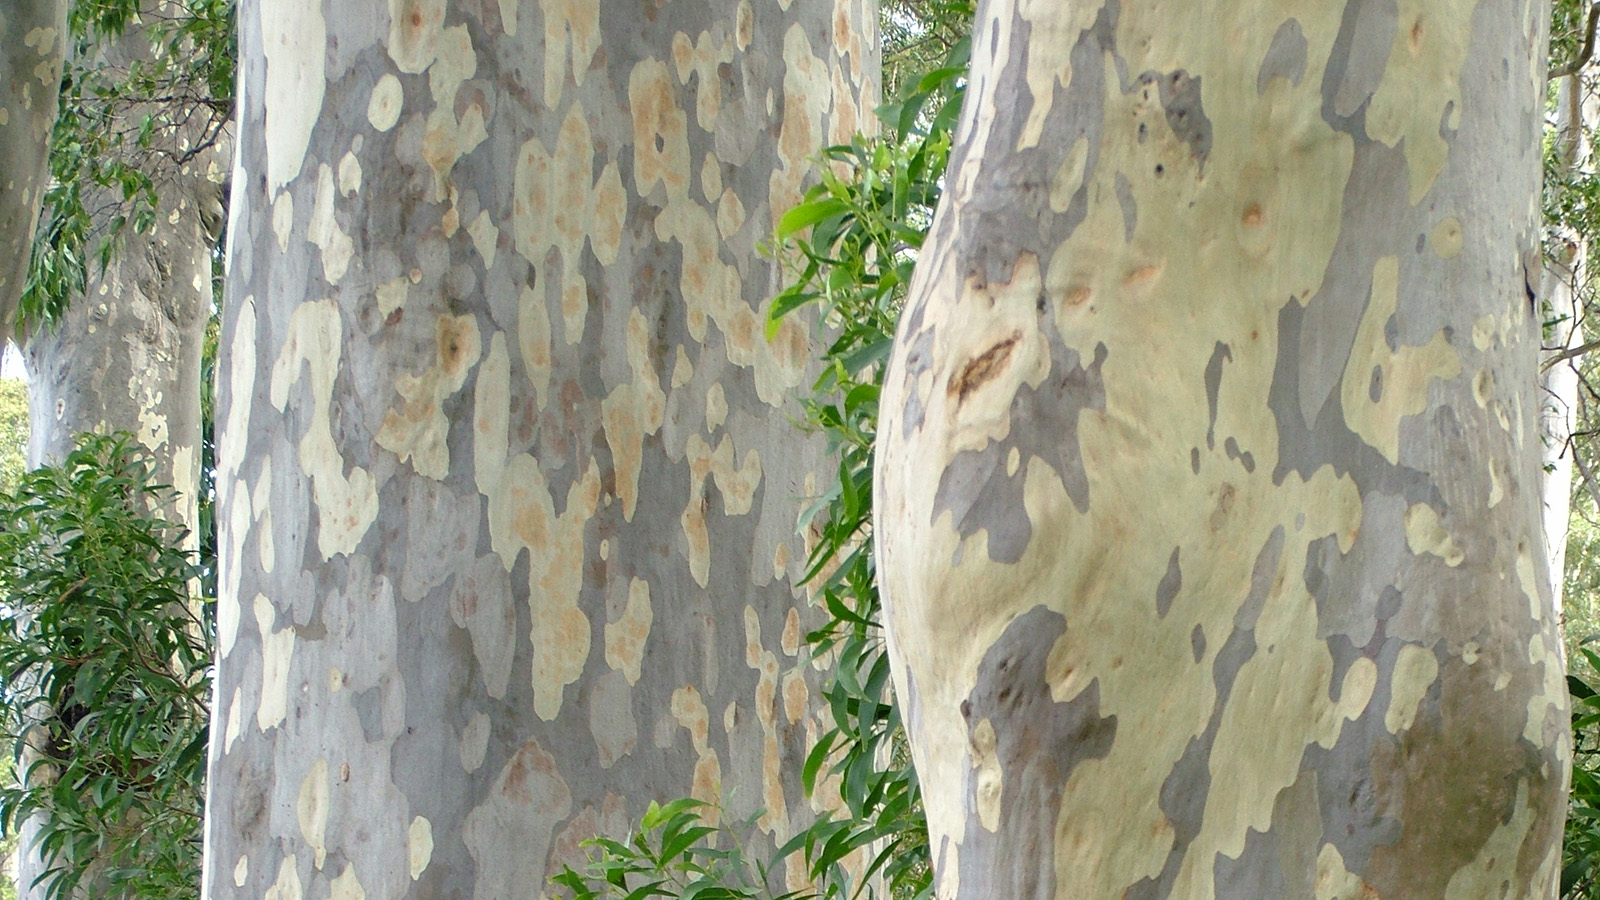 Flora: Spotted gum tree